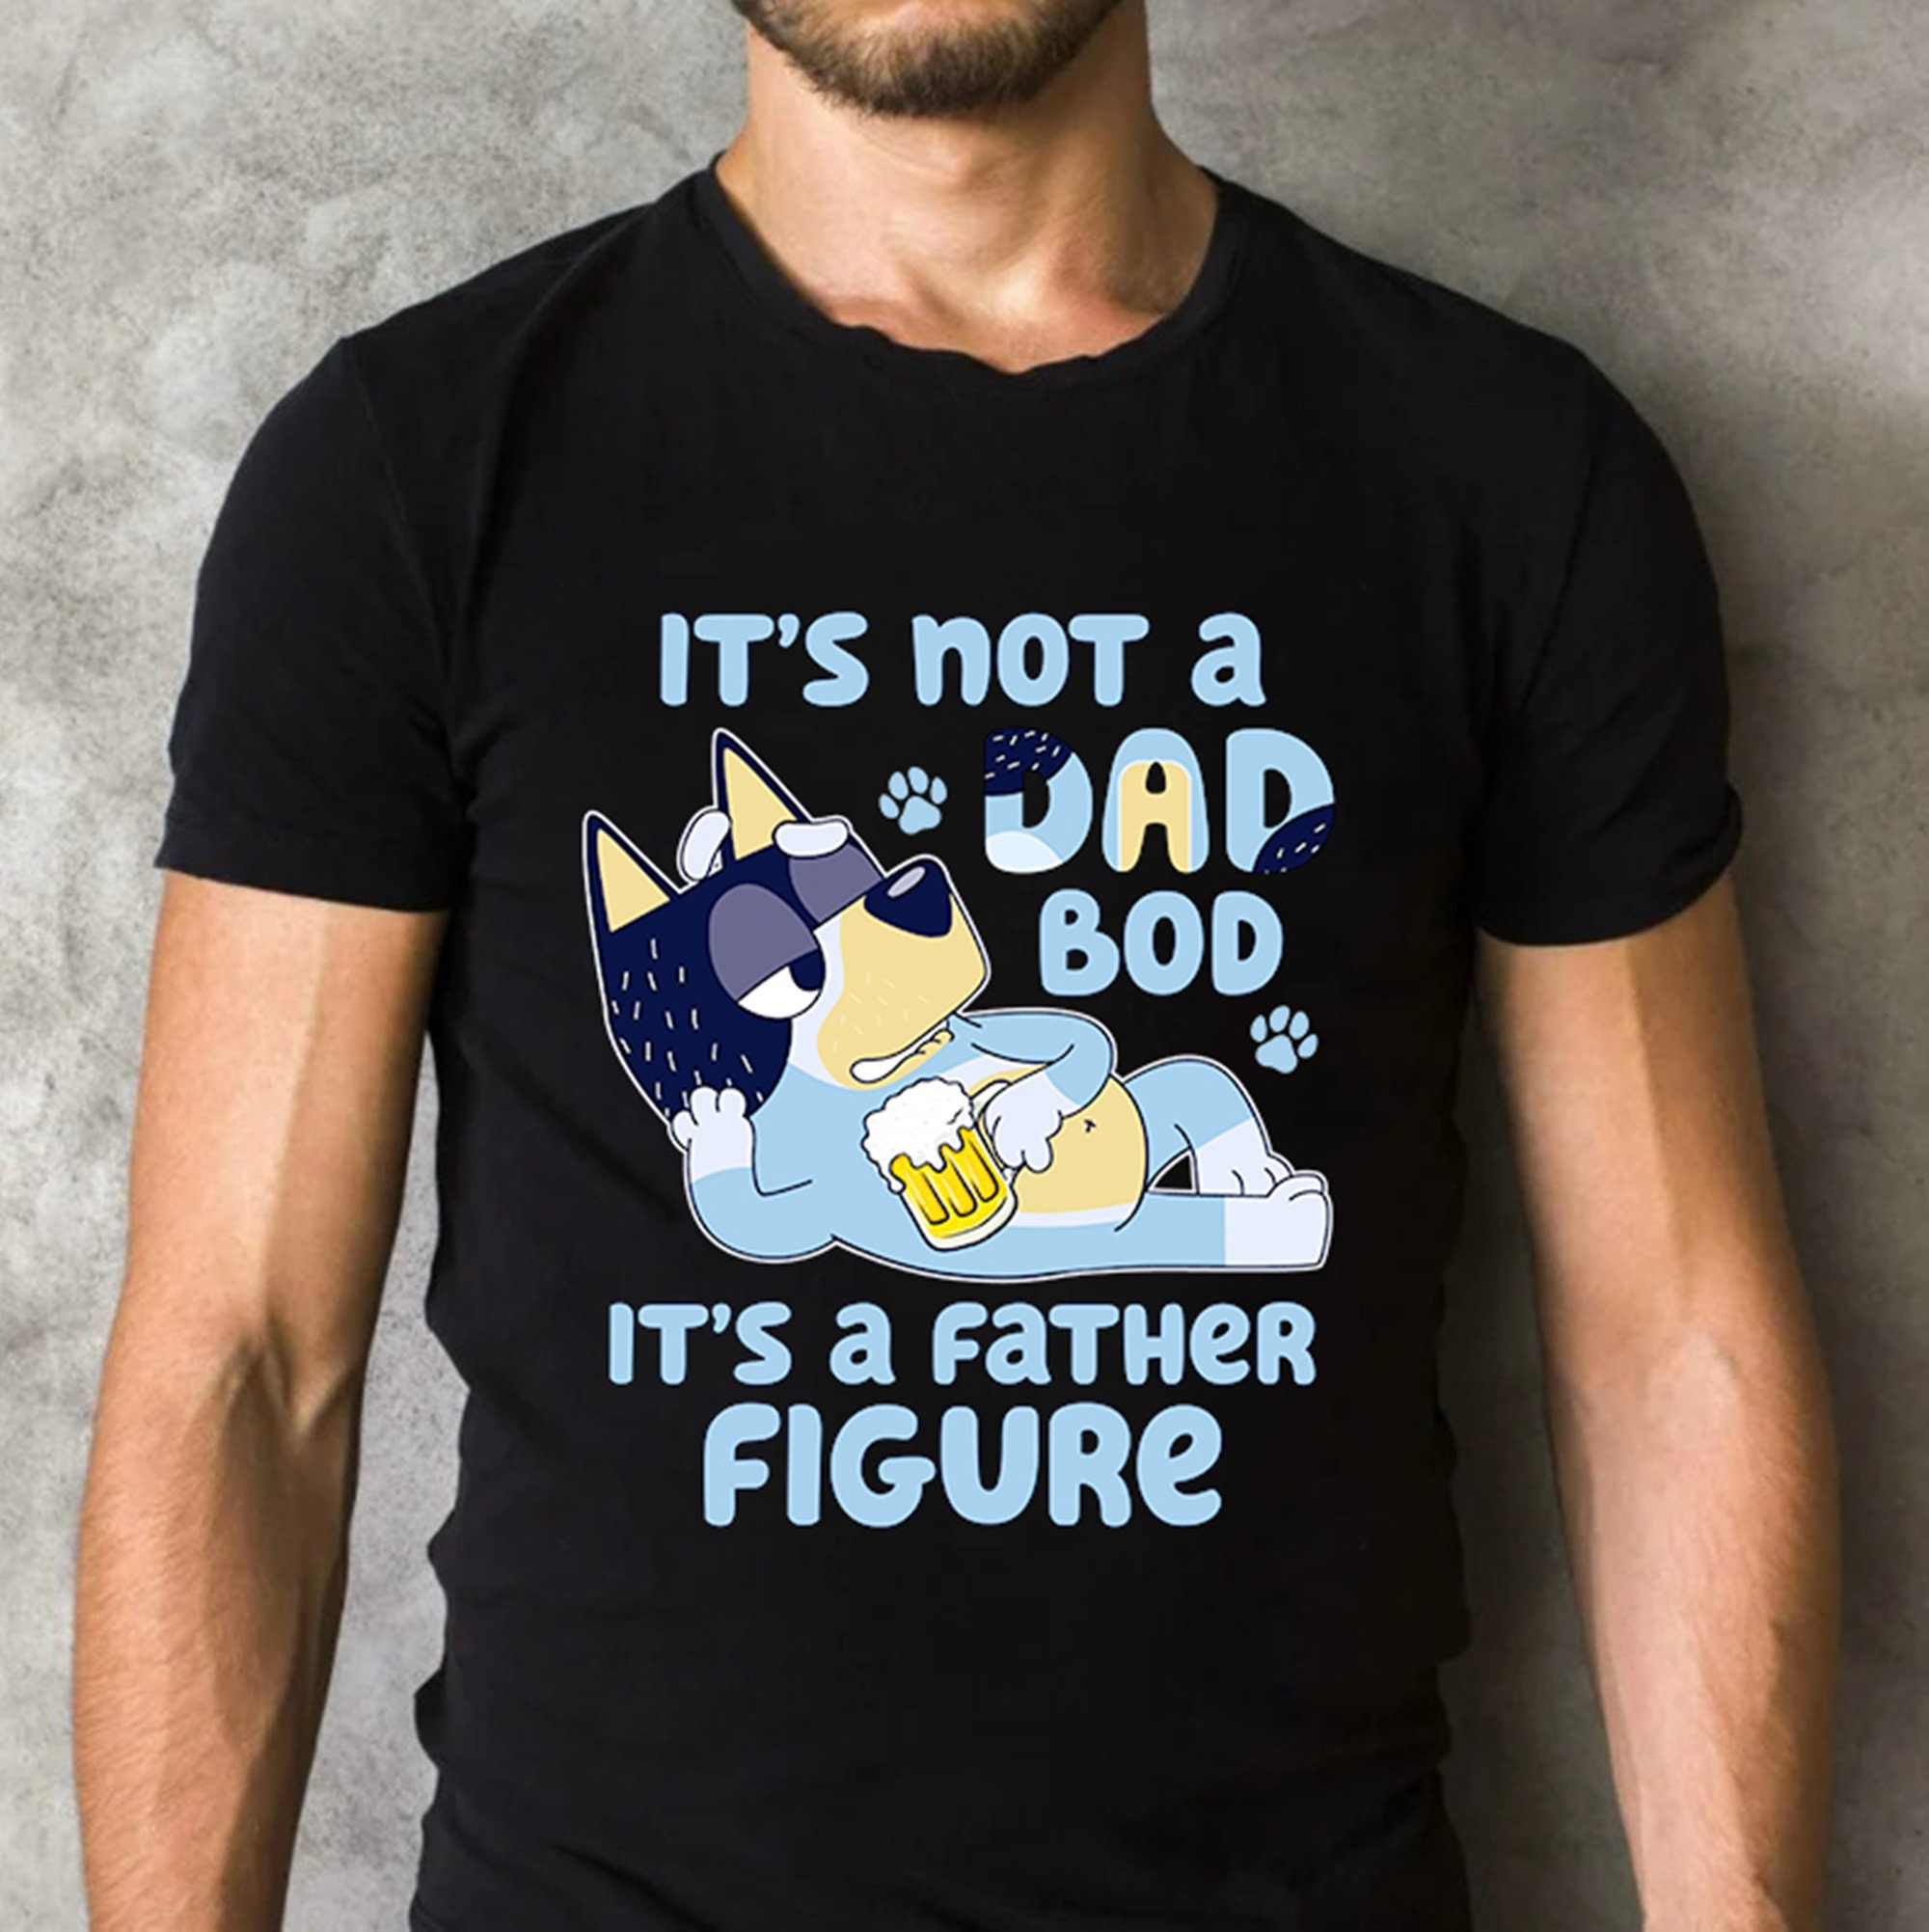 It's not a Dad BOD It's a Father Figure Bluey T-Shirt, Bluey Father T-Shirt  - The best gifts are made with Love